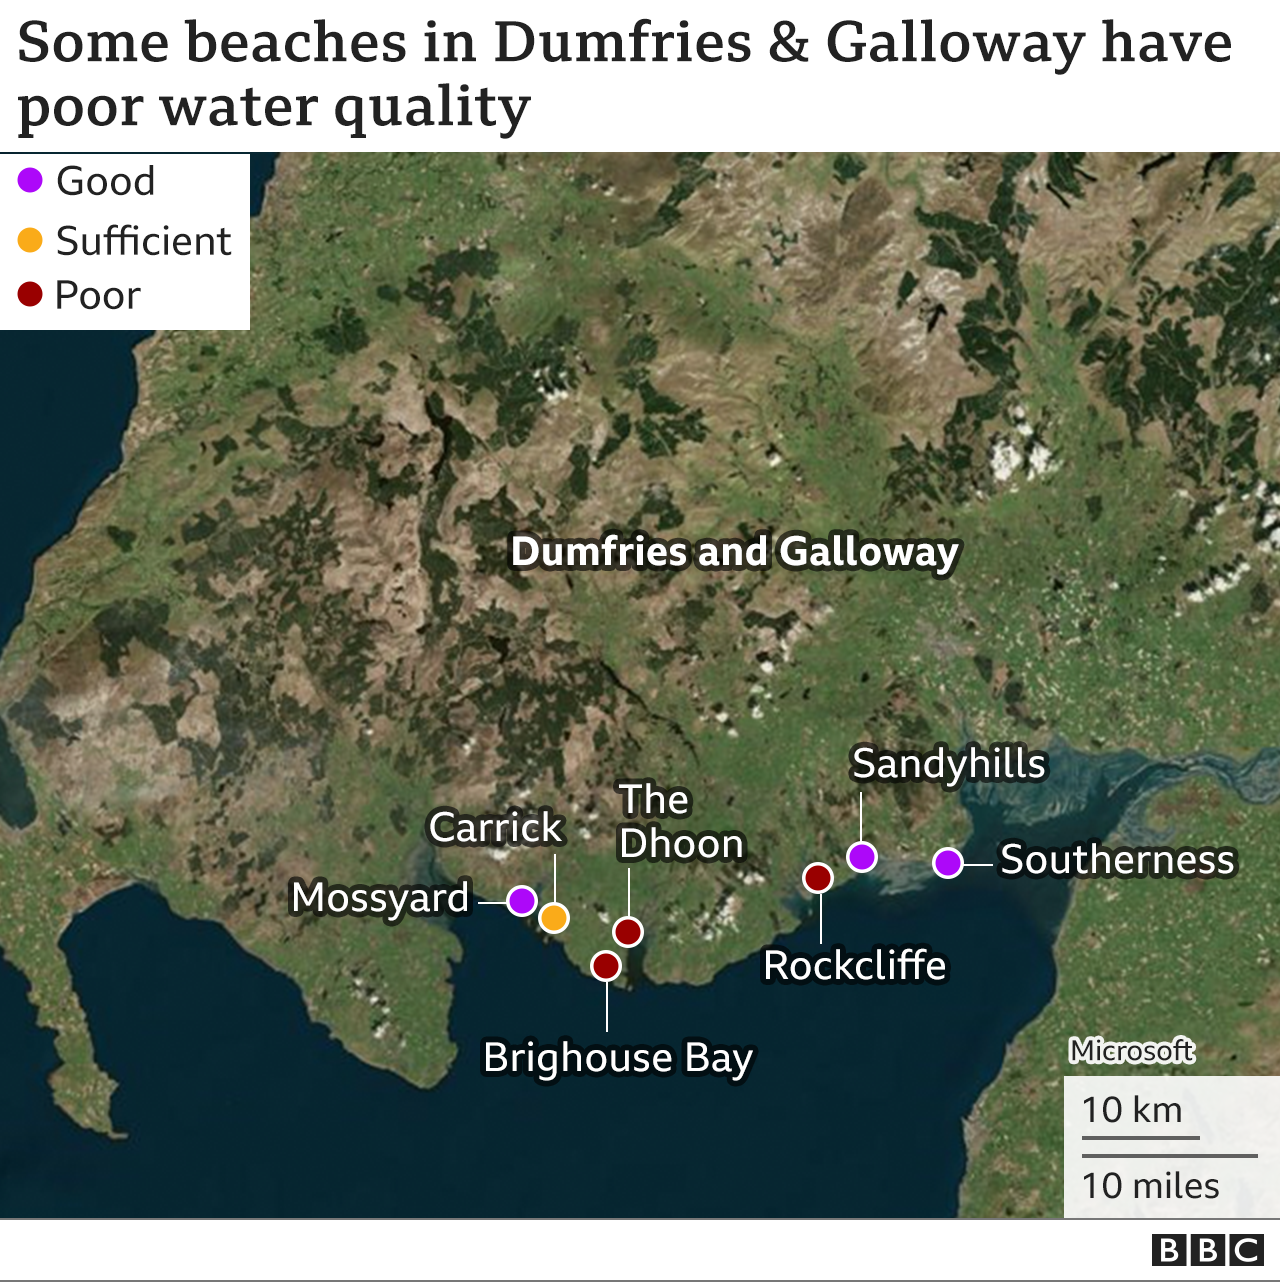 Beaches in Dumfries and Galloway